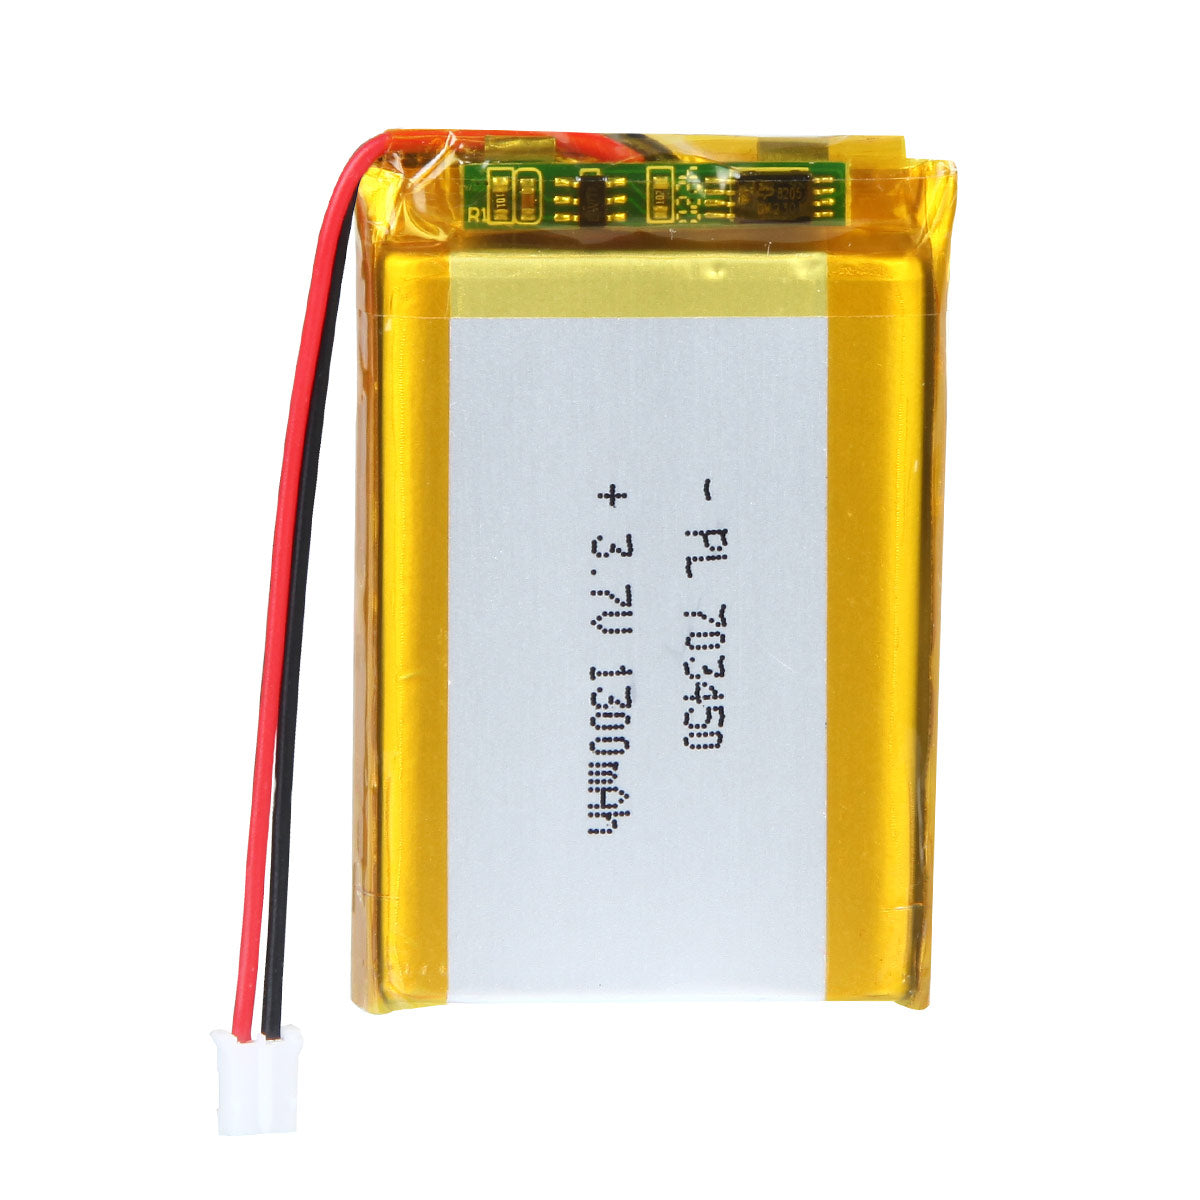 YDL 3.7V 1300mAh 703450 Rechargeable Lipo Battery with JST Connector - YDL Battery